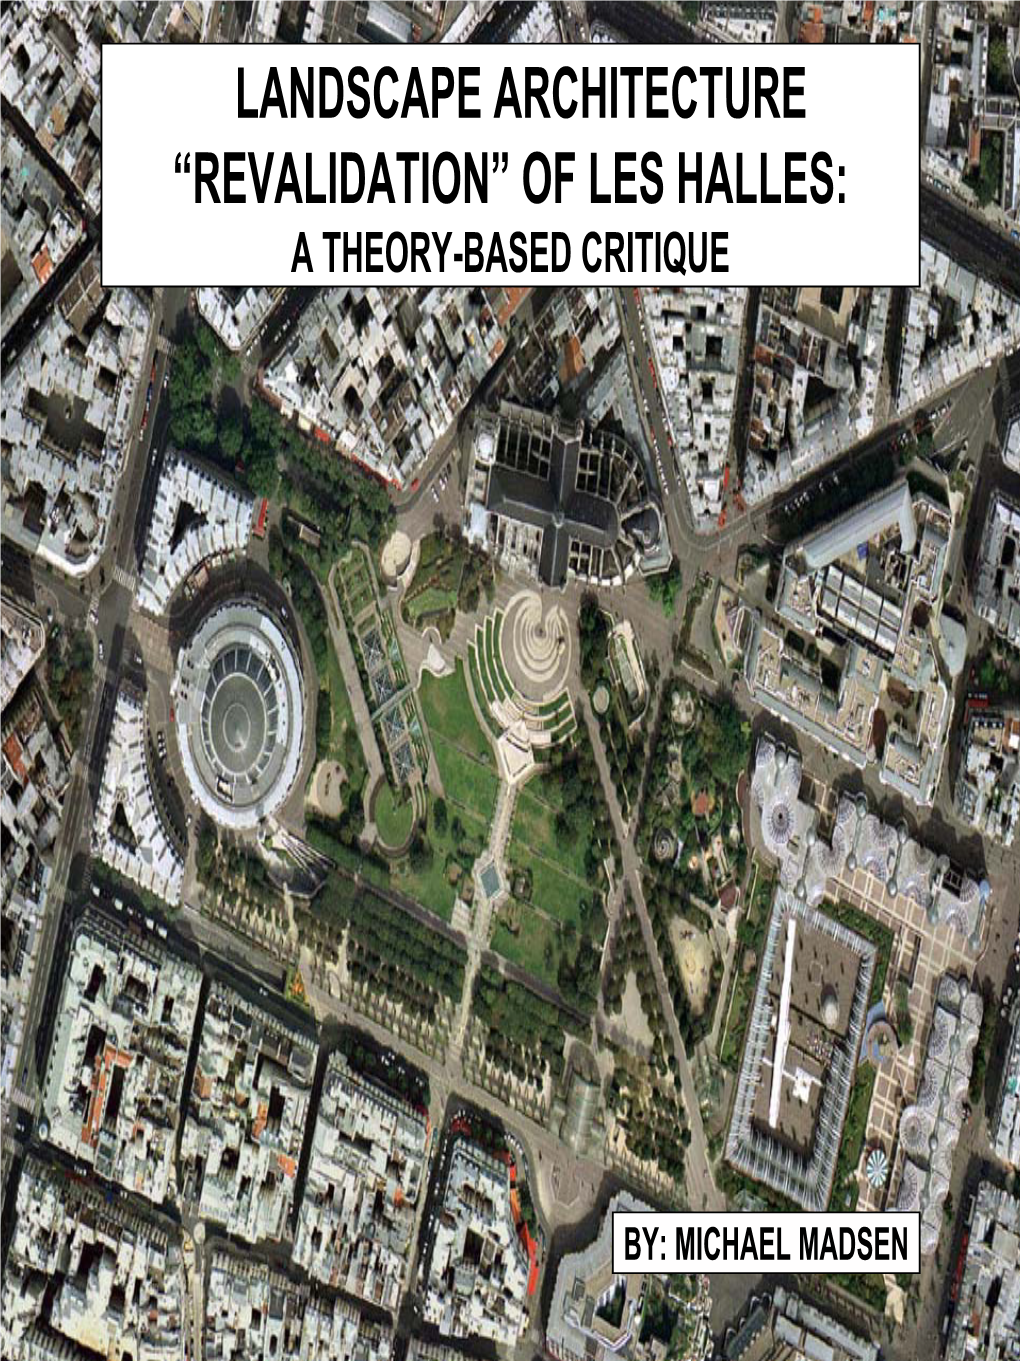 Landscape Architecture “Revalidation” of Les Halles: a Theory-Based Critique